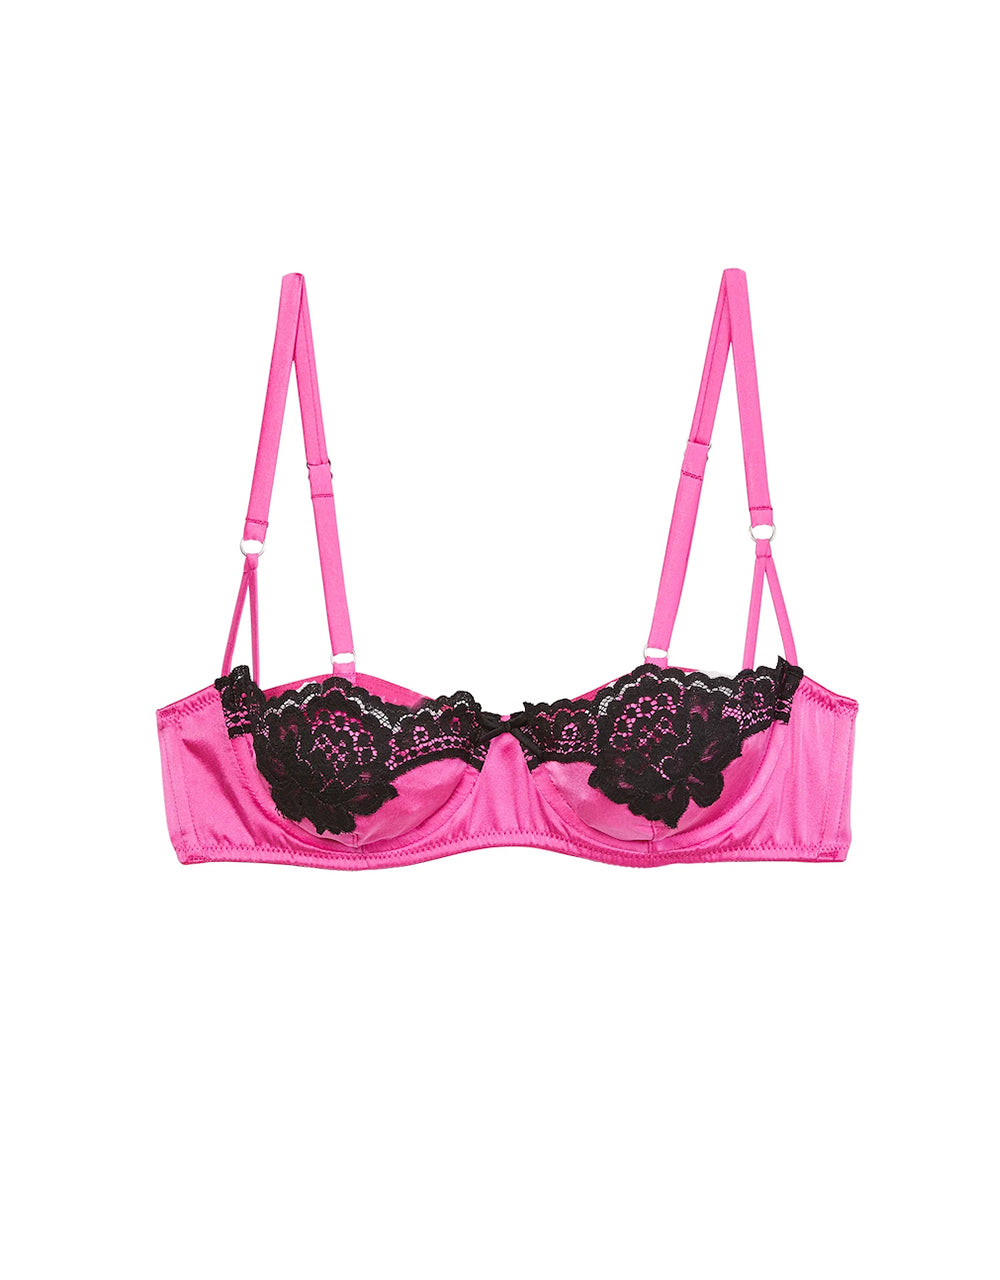 All About Eve Balconette Bra